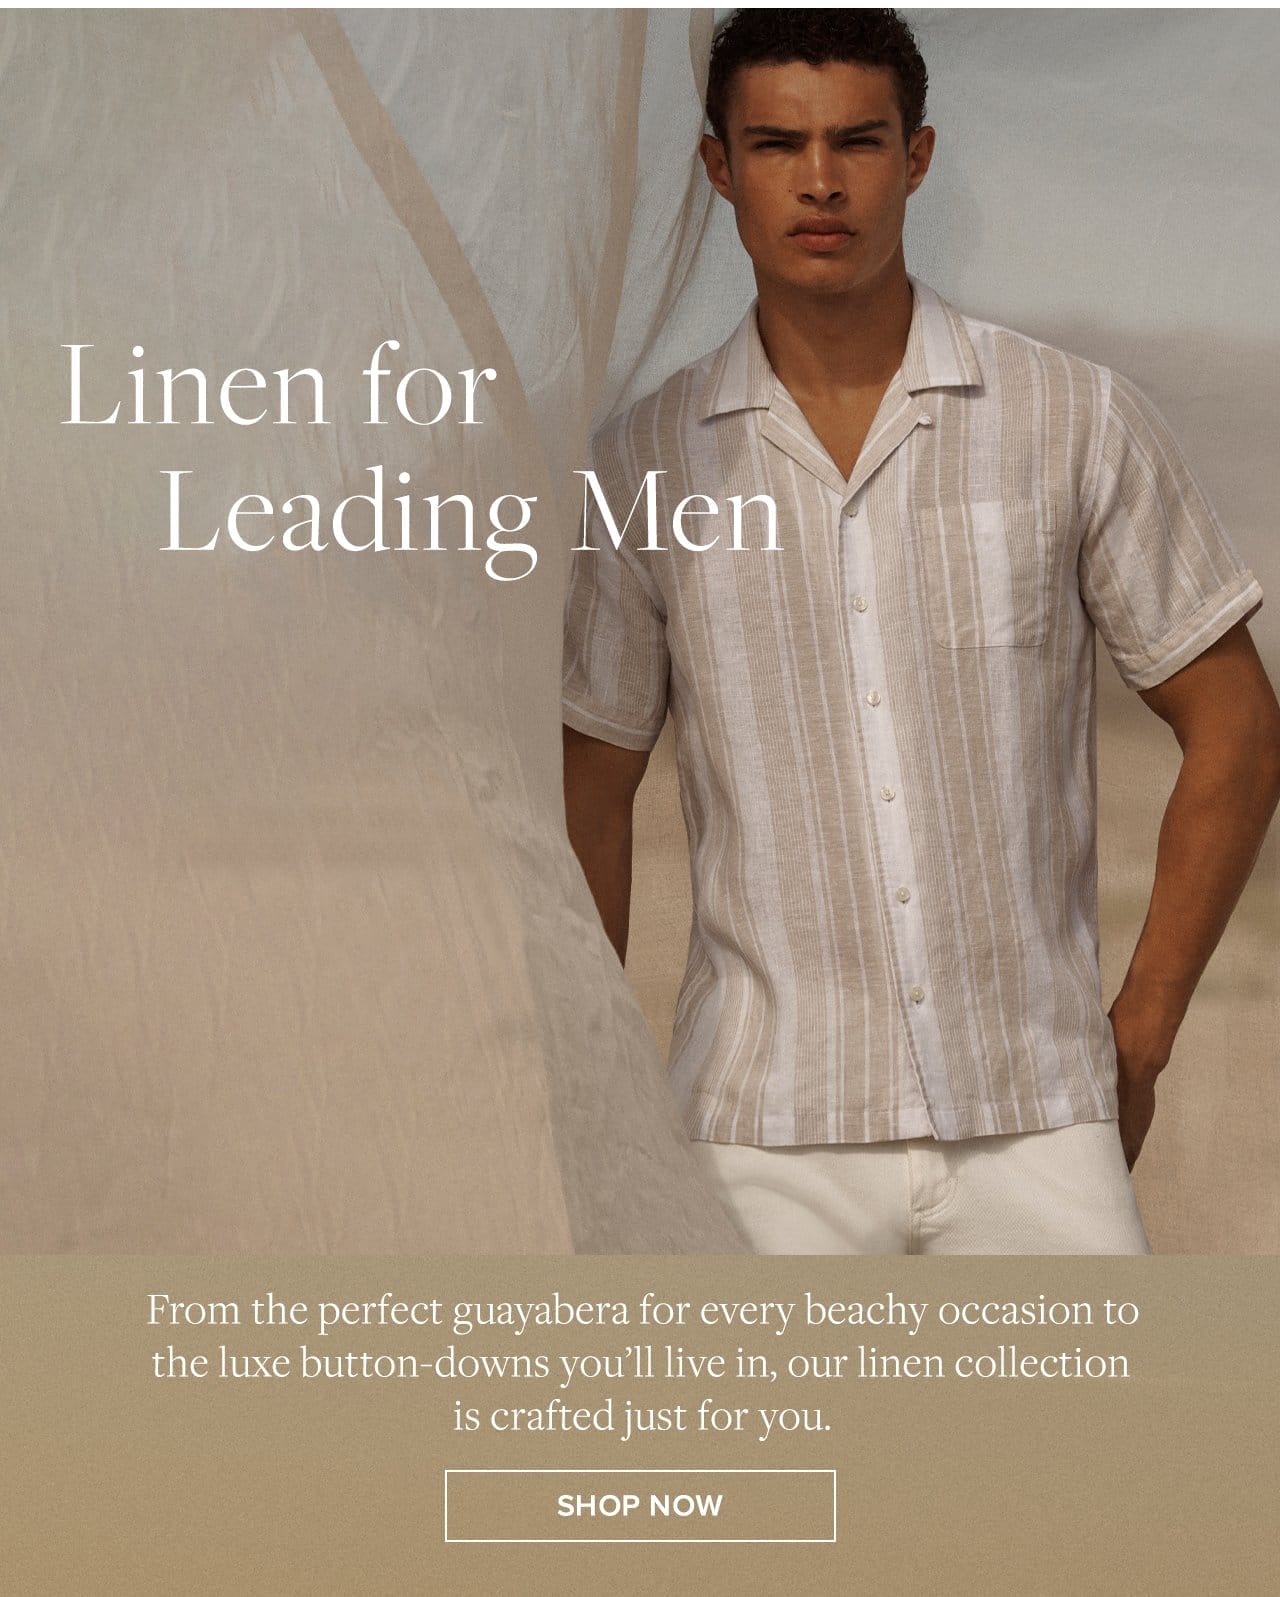 Linen for Leading Men From the perfect guayabera for every beachy occasion to the luxe button-downs you'll live in, our linen collection is crafted just for you. Shop Now